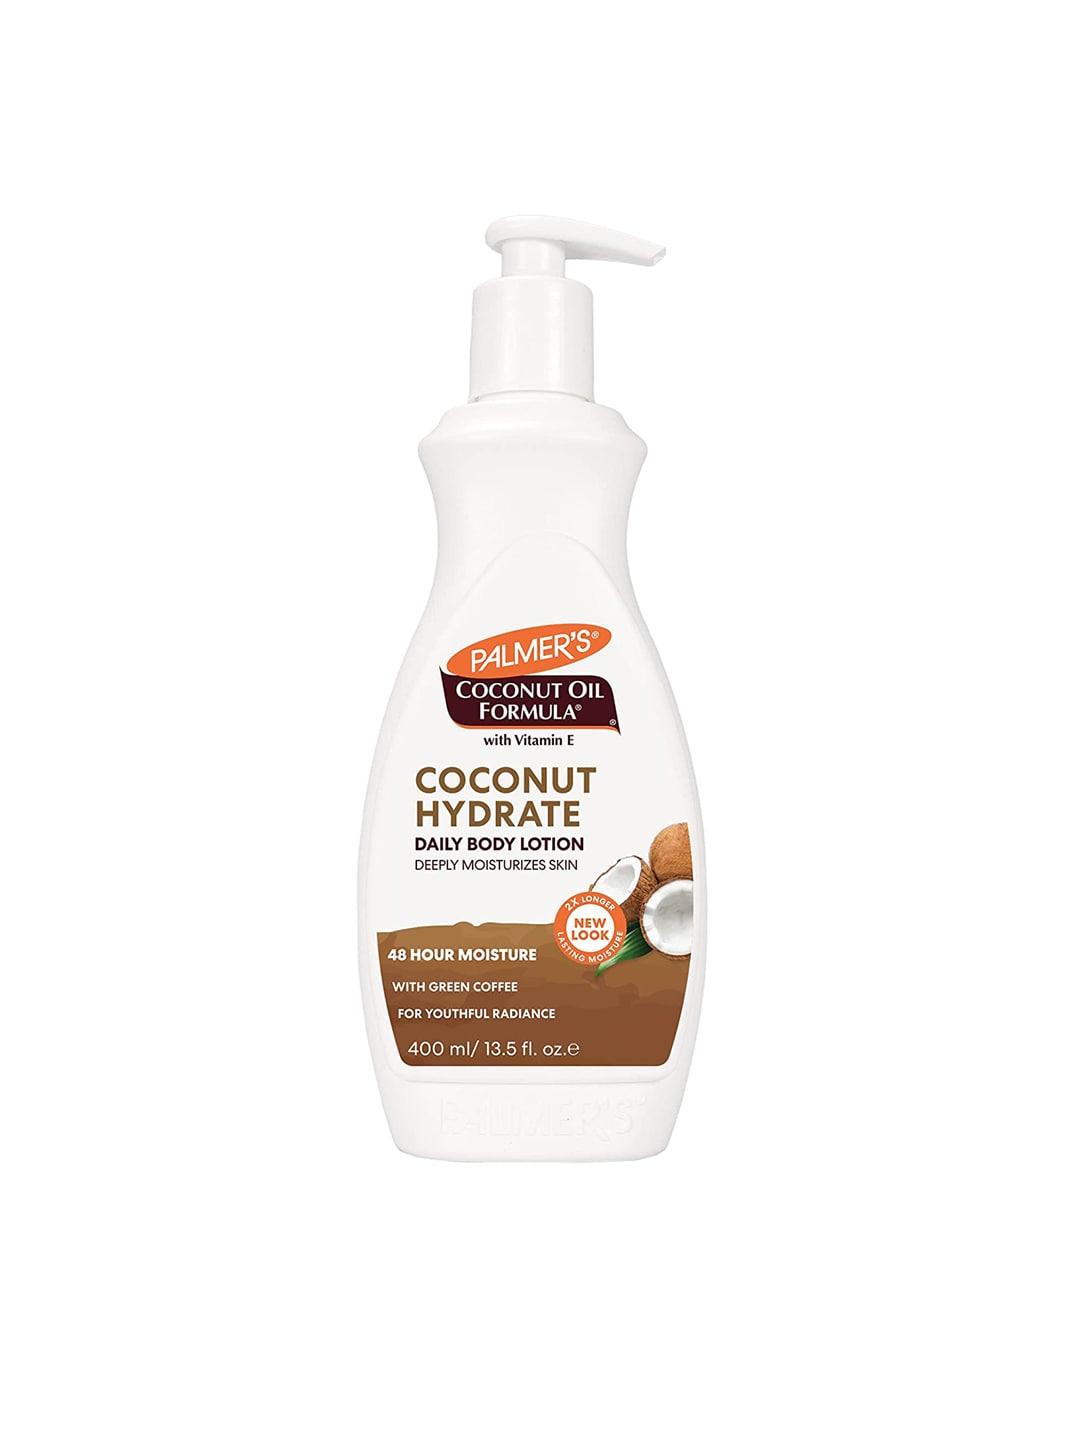 Palmer's Coconut Hydrate Daily Body Lotion with Vitamin E & Green Coffee - 400ml